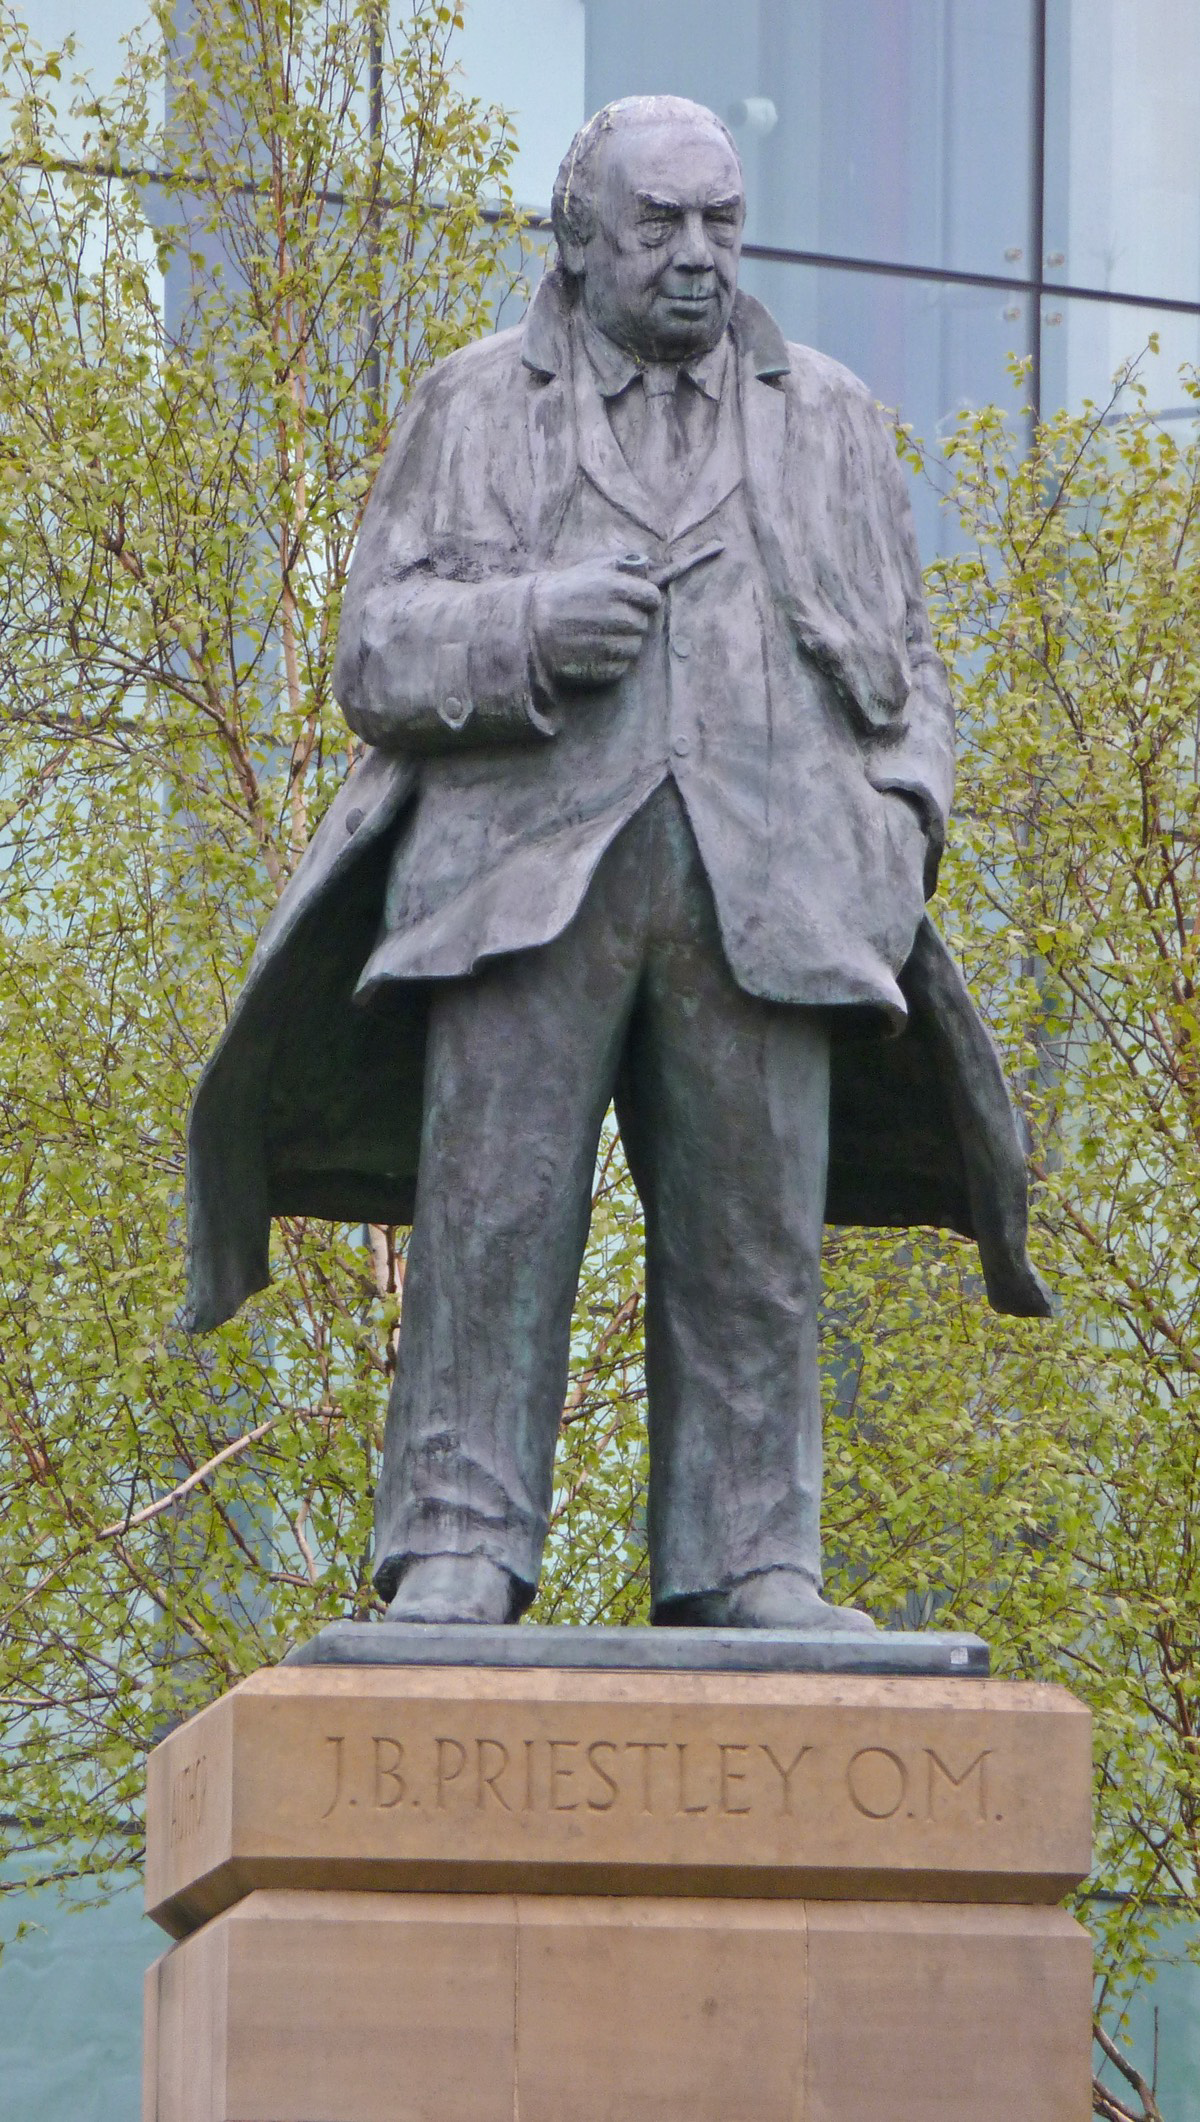 4) A statue of Priestley in his hometown of Bradford, UK. Copyright © Tim Green